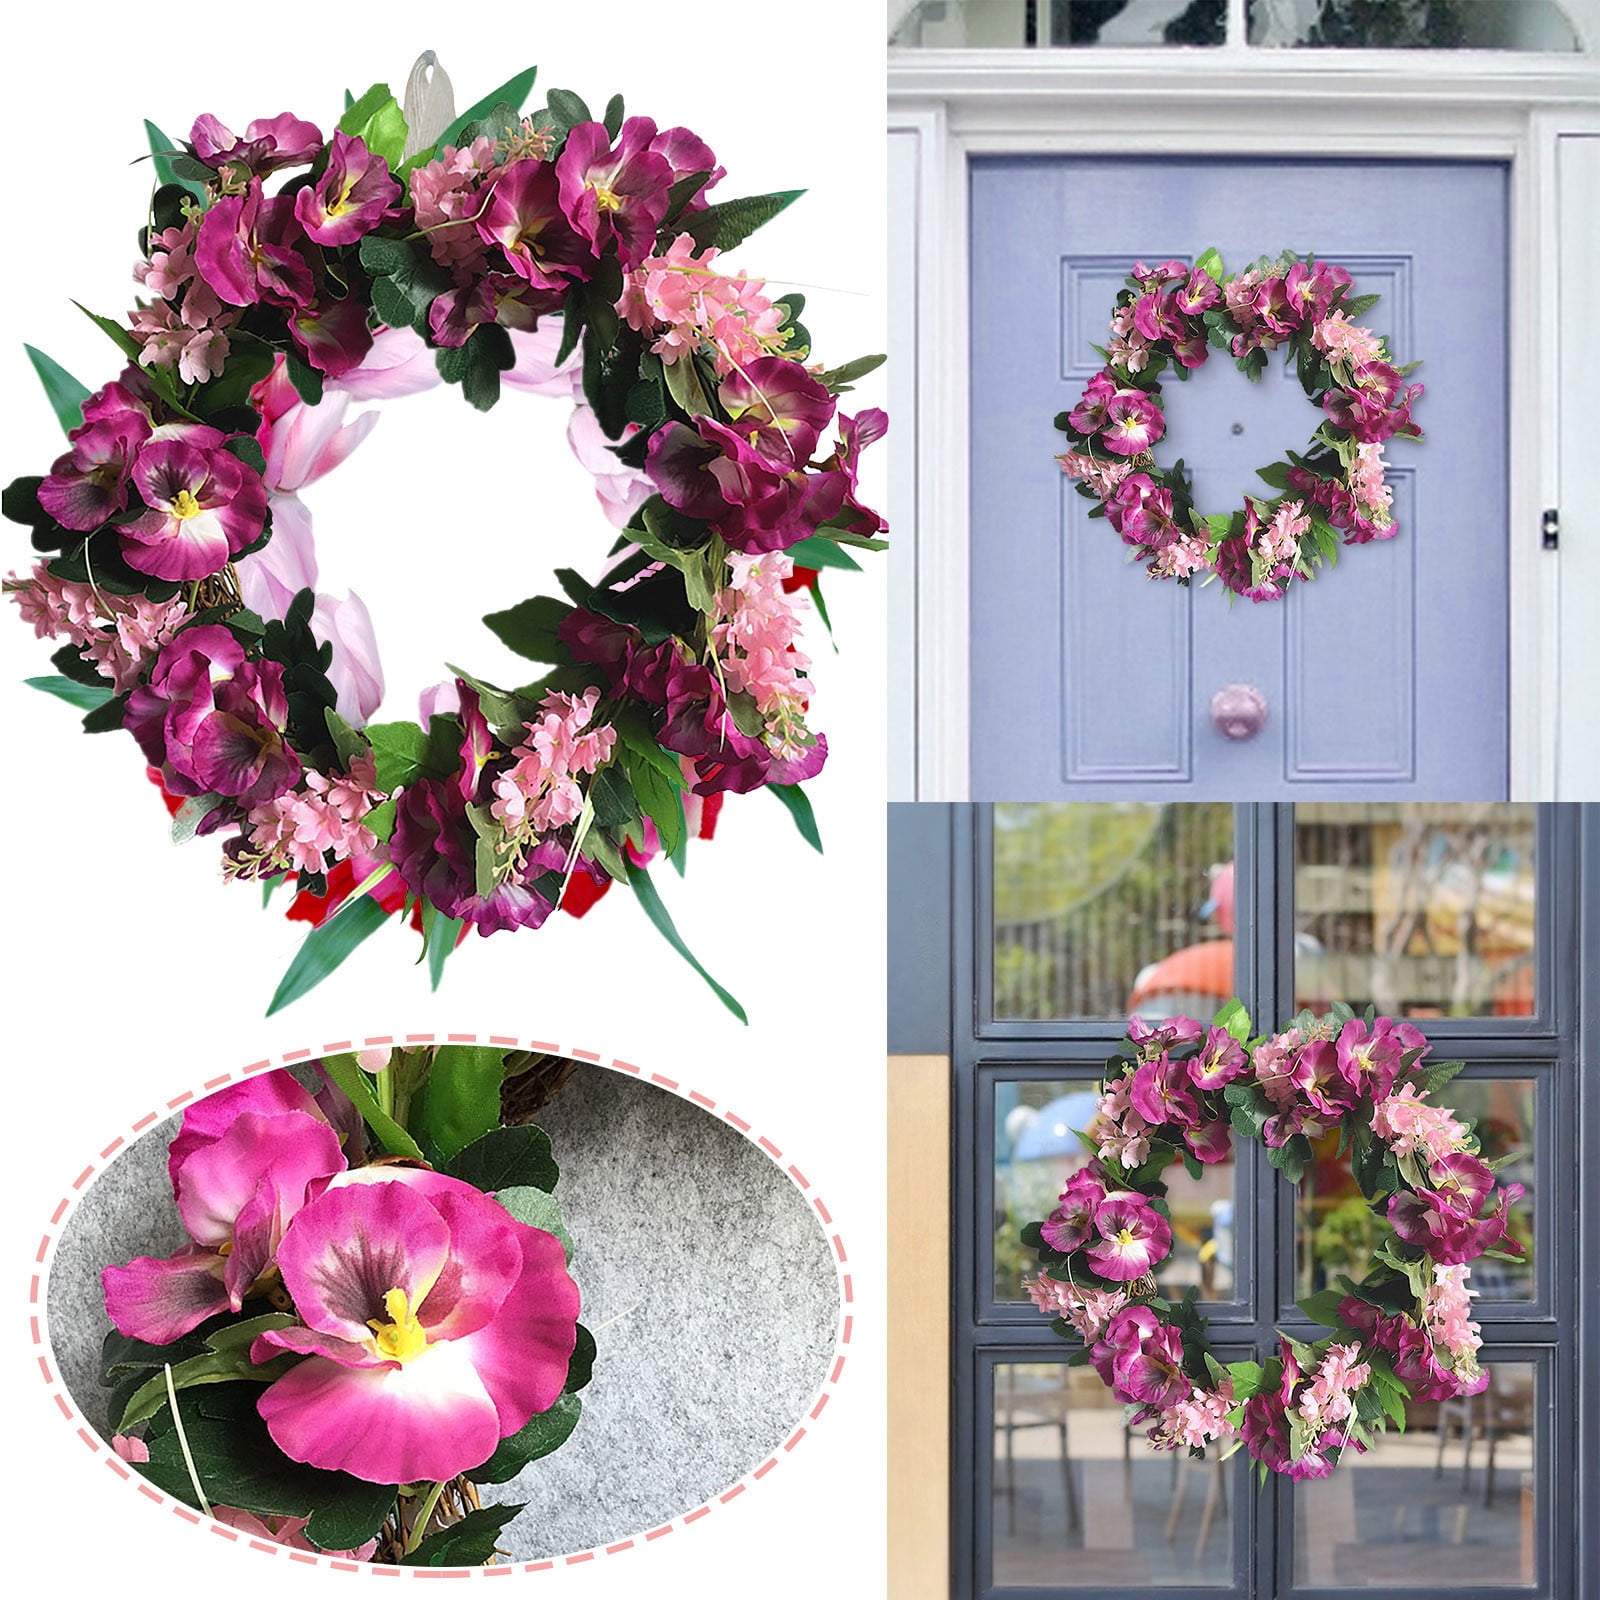 Simulation Iron Art Rose Succulent Metal Circle Spring Wreath Home Living Room Wall Hanging Decoration Door Hanging Simulation Wreath HENGCHENG Easter Wreaths for Front Door